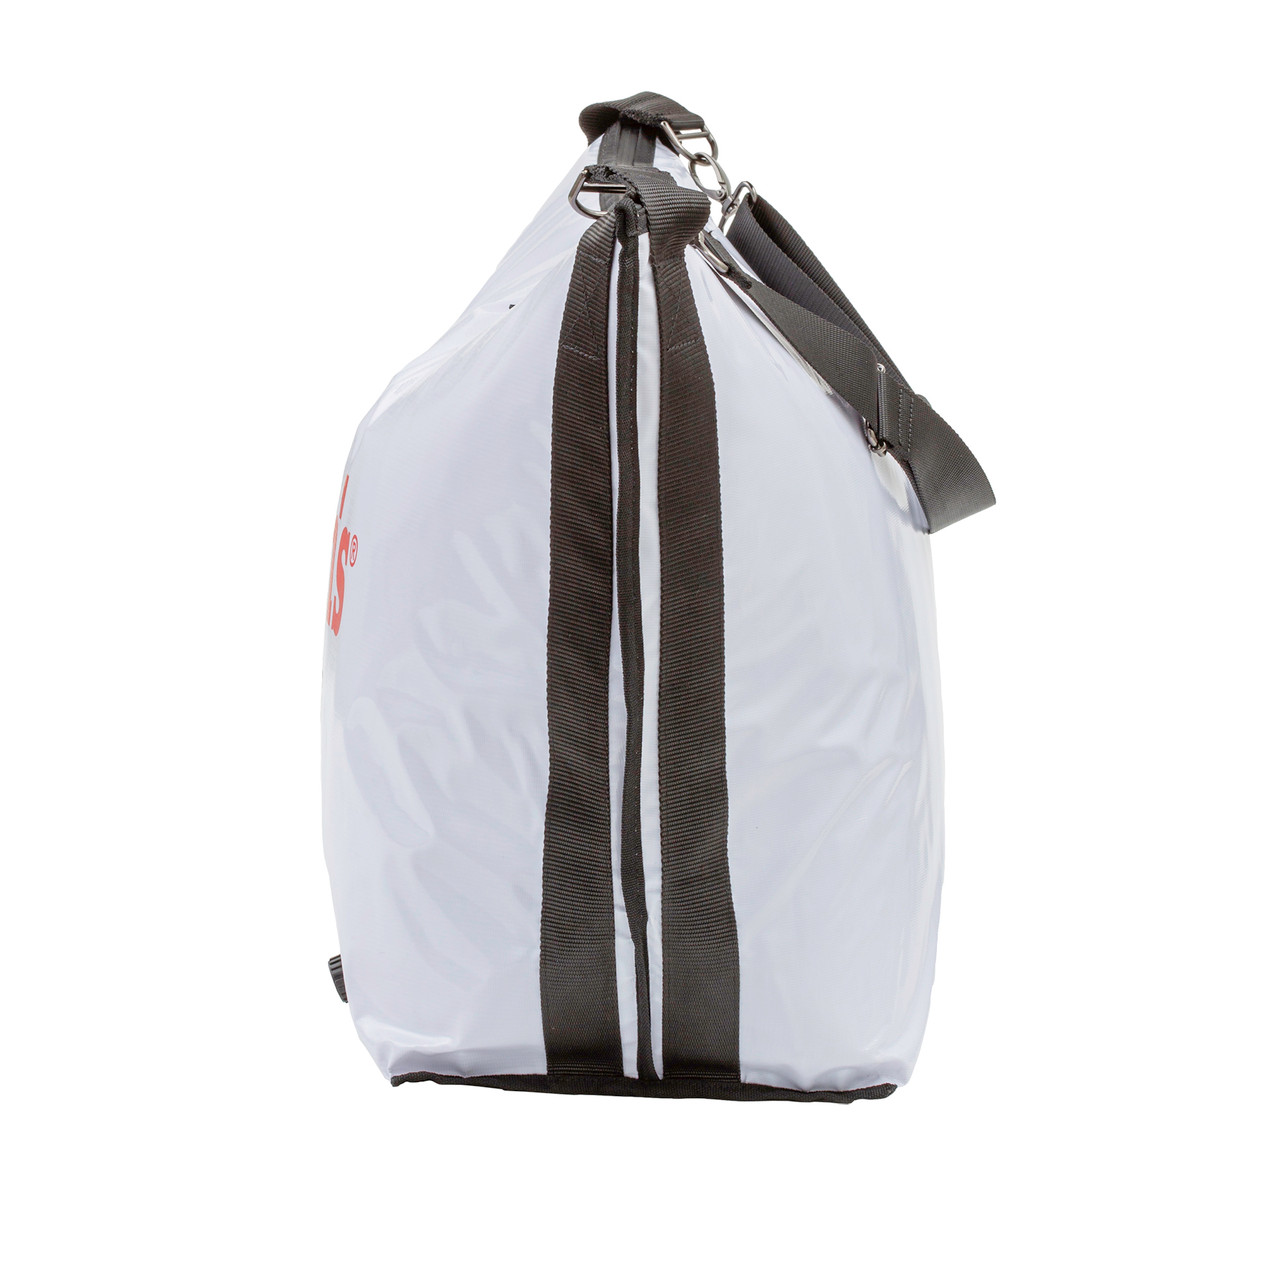 Insulated 36 Bait and Fish Kill Bag - Smith's Consumer Products